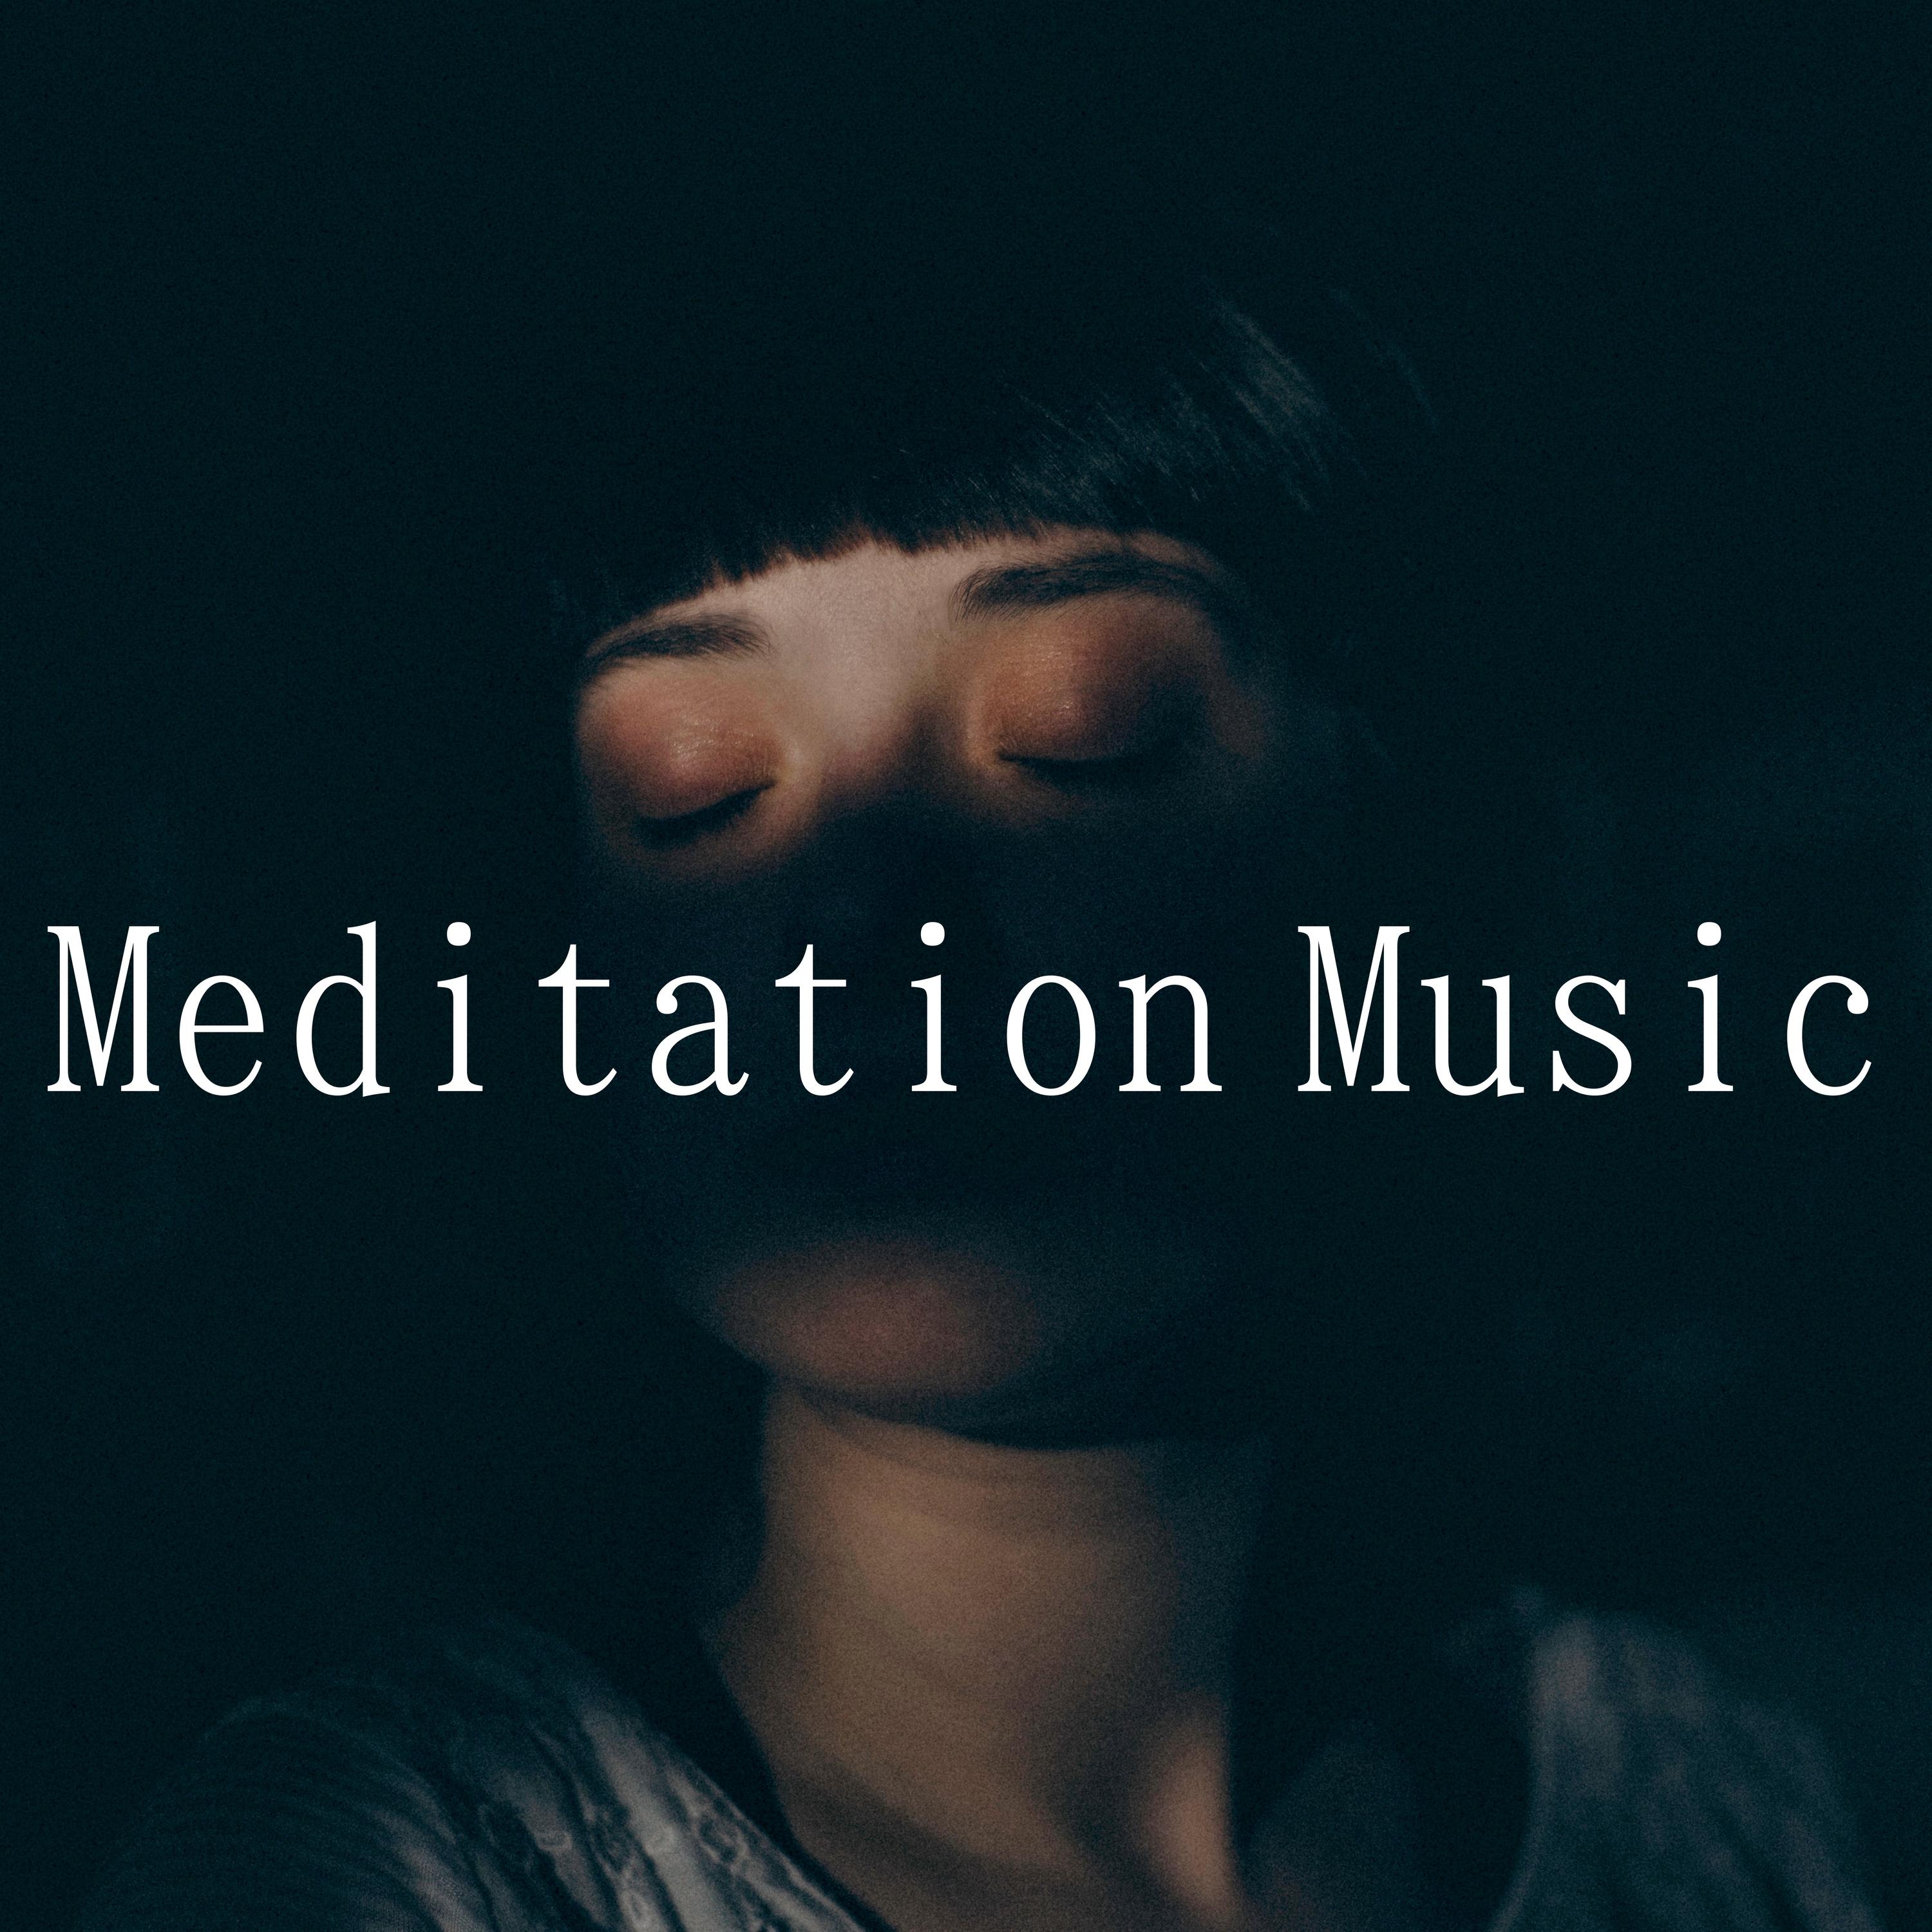 Meditation Music - Prime Audio CD for Mindfulness Sessions